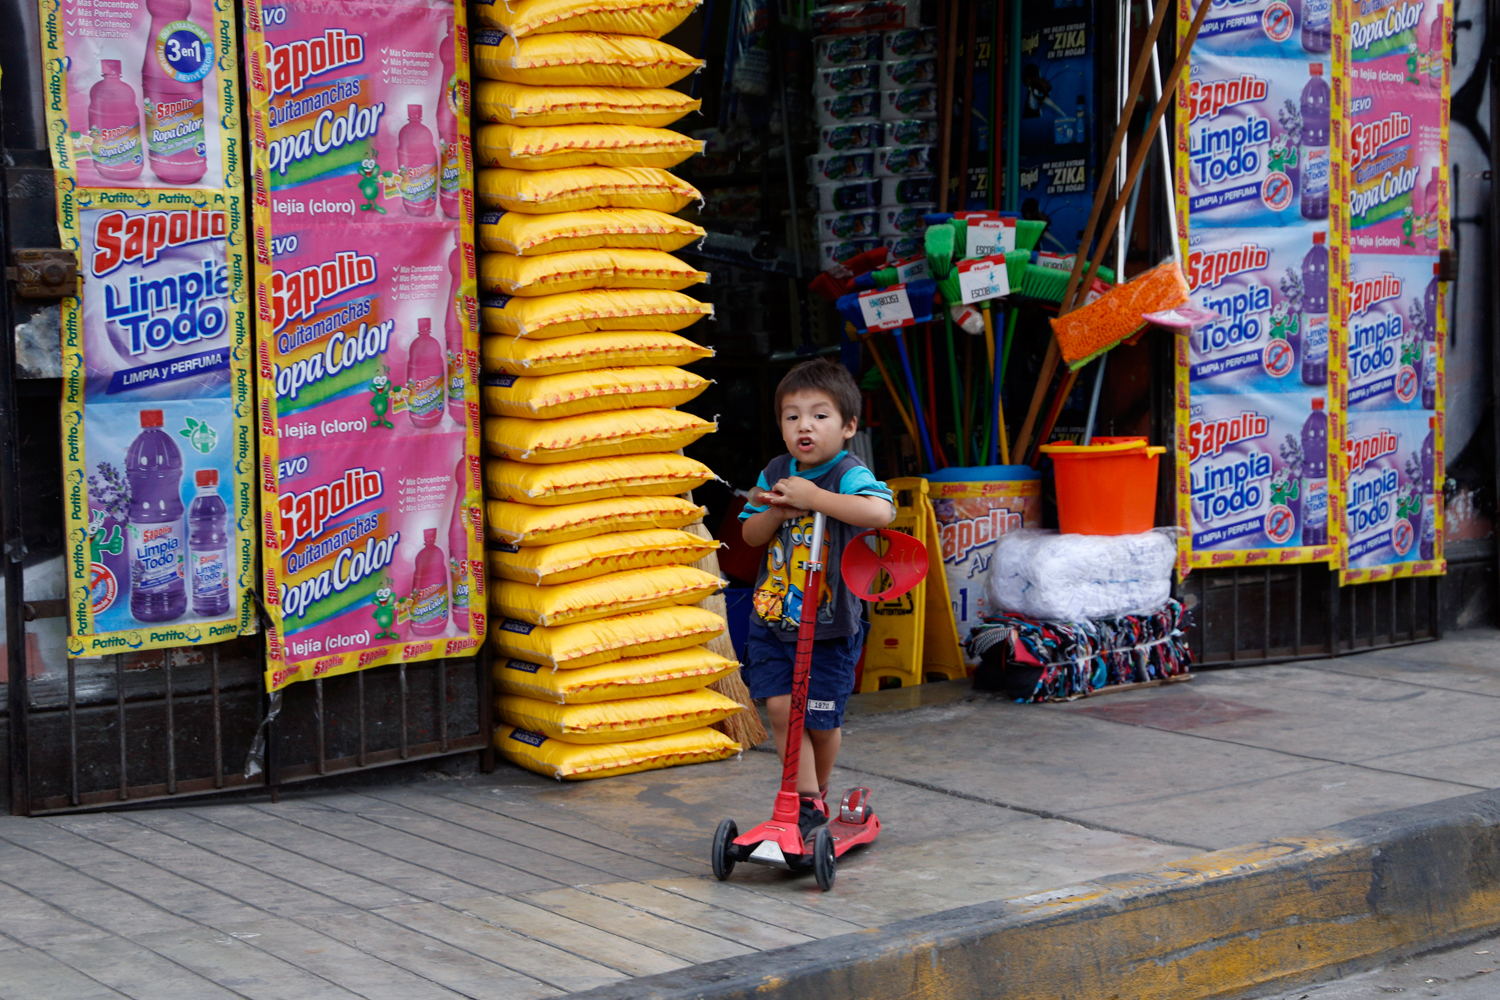 A young boy is riding his red scooter along the pavement in front of a shop that sells cleaning supplies. His shirt features two Minions from the Despicable Me movie franchise and a Spider Man mask is dangling from the handlebar of his scooter.